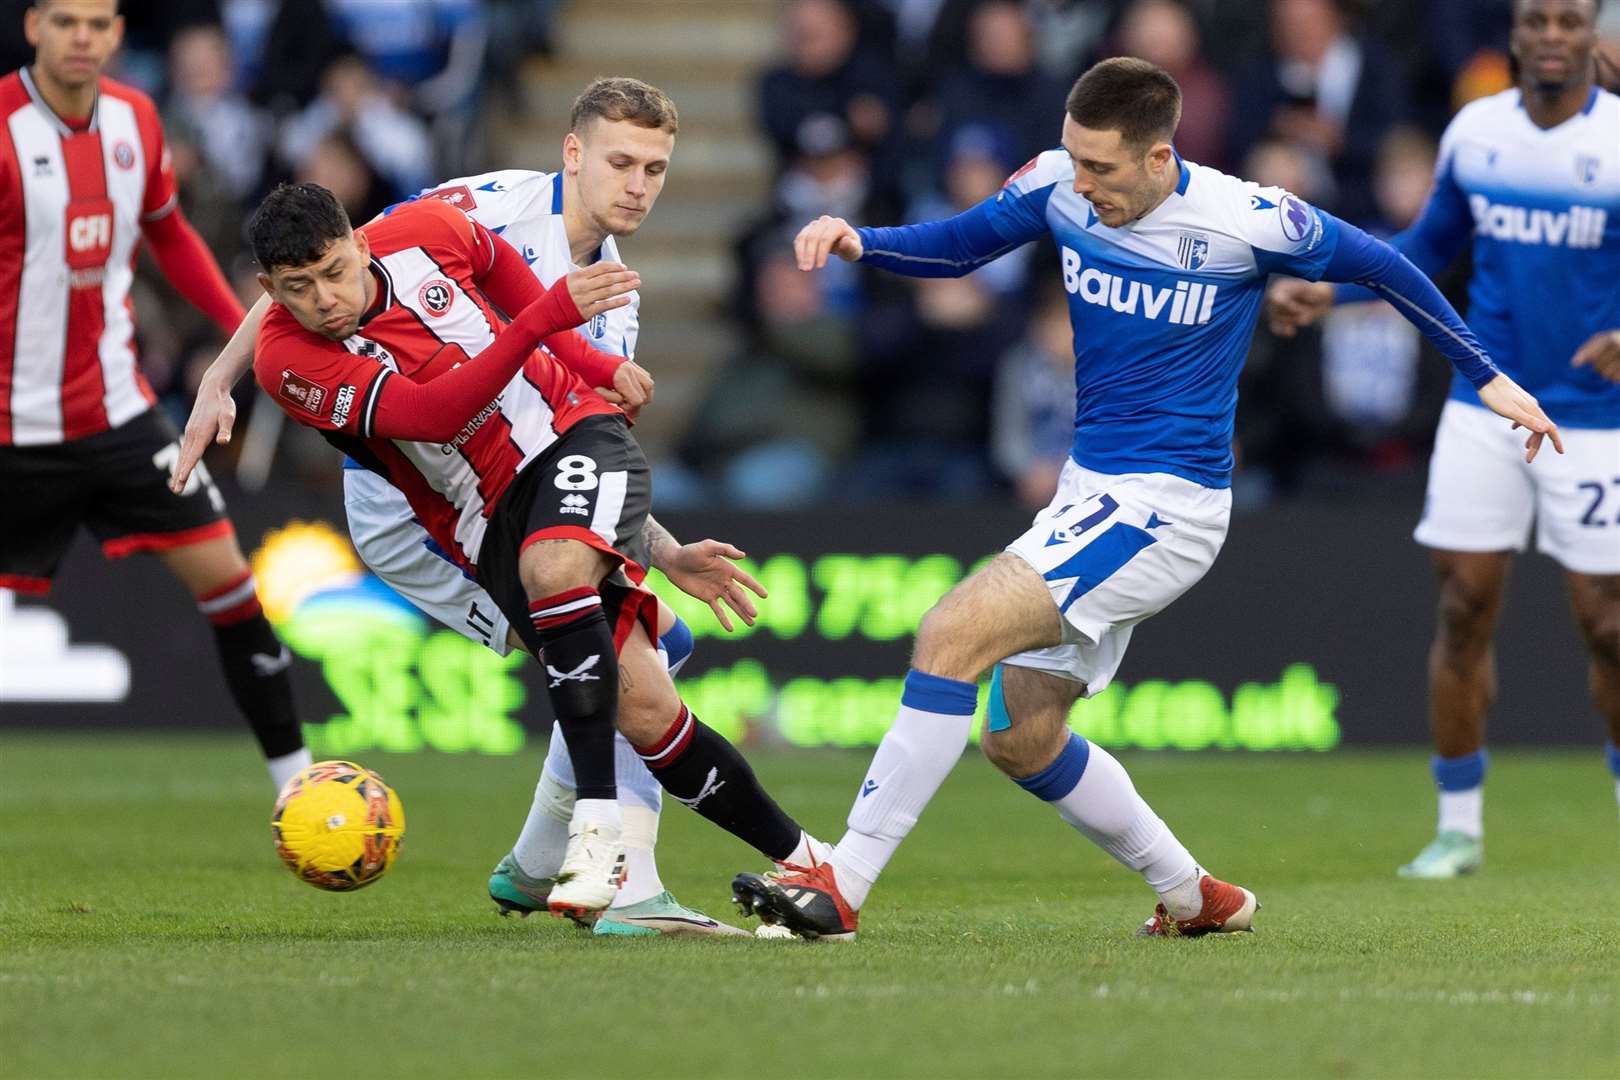 Dom Jefferies and Ethan Coleman challenge for the ball as Gillingham take on Sheffield United Picture: @Julian_KPI